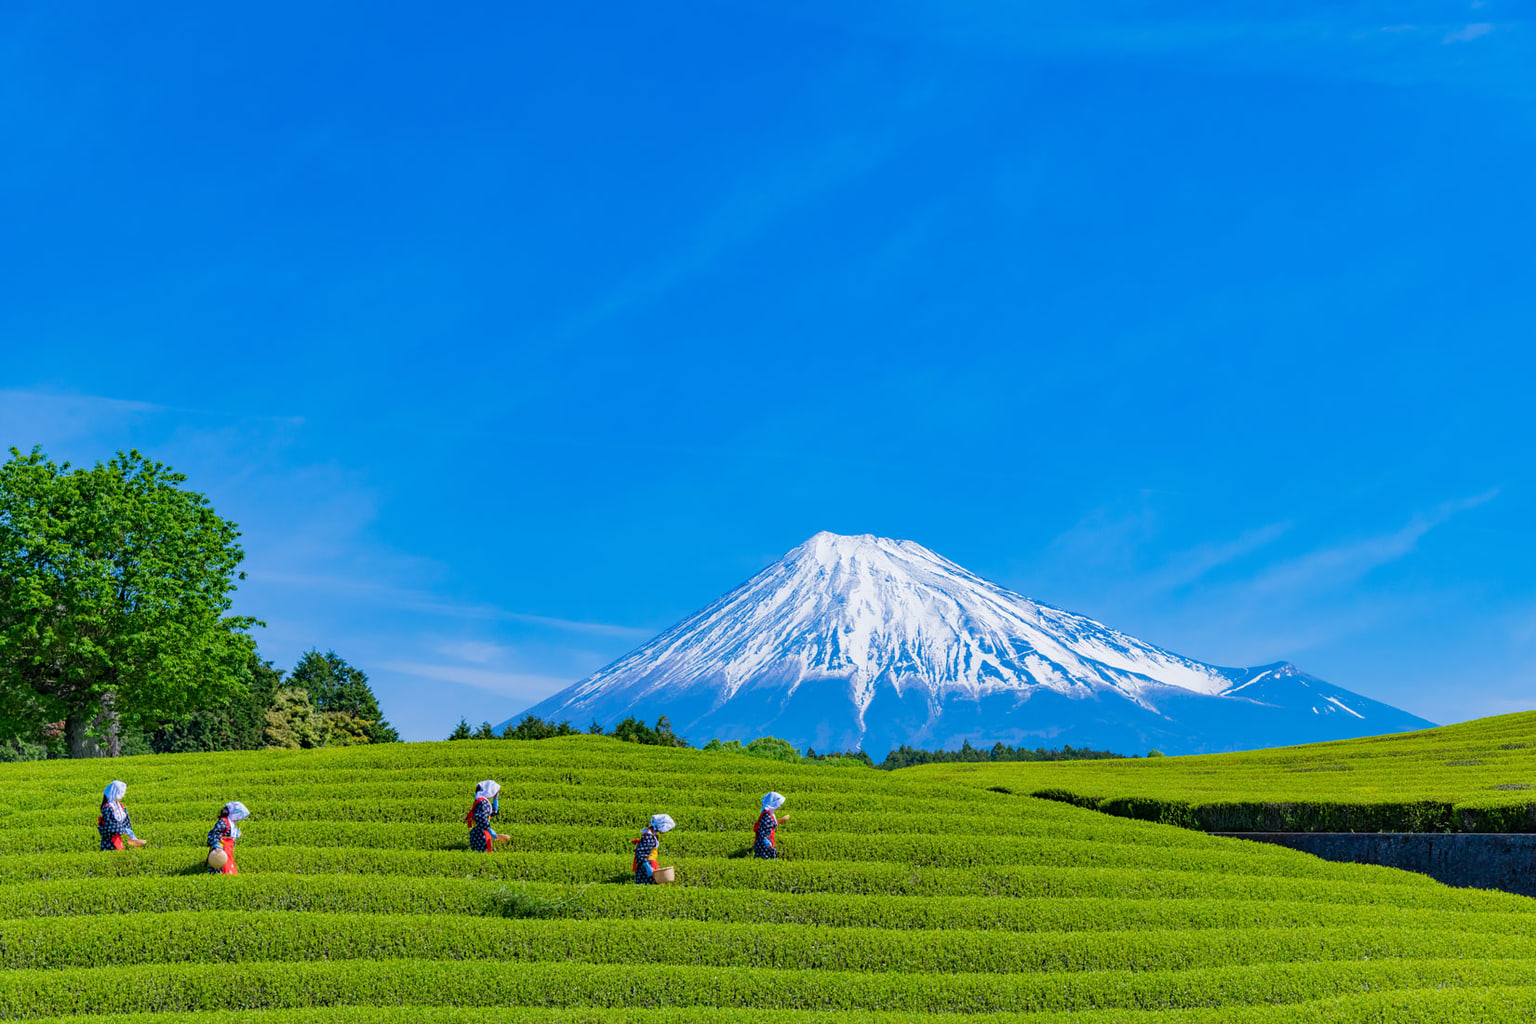 3 of The Most Important Green Tea-Growing Regions in Japan